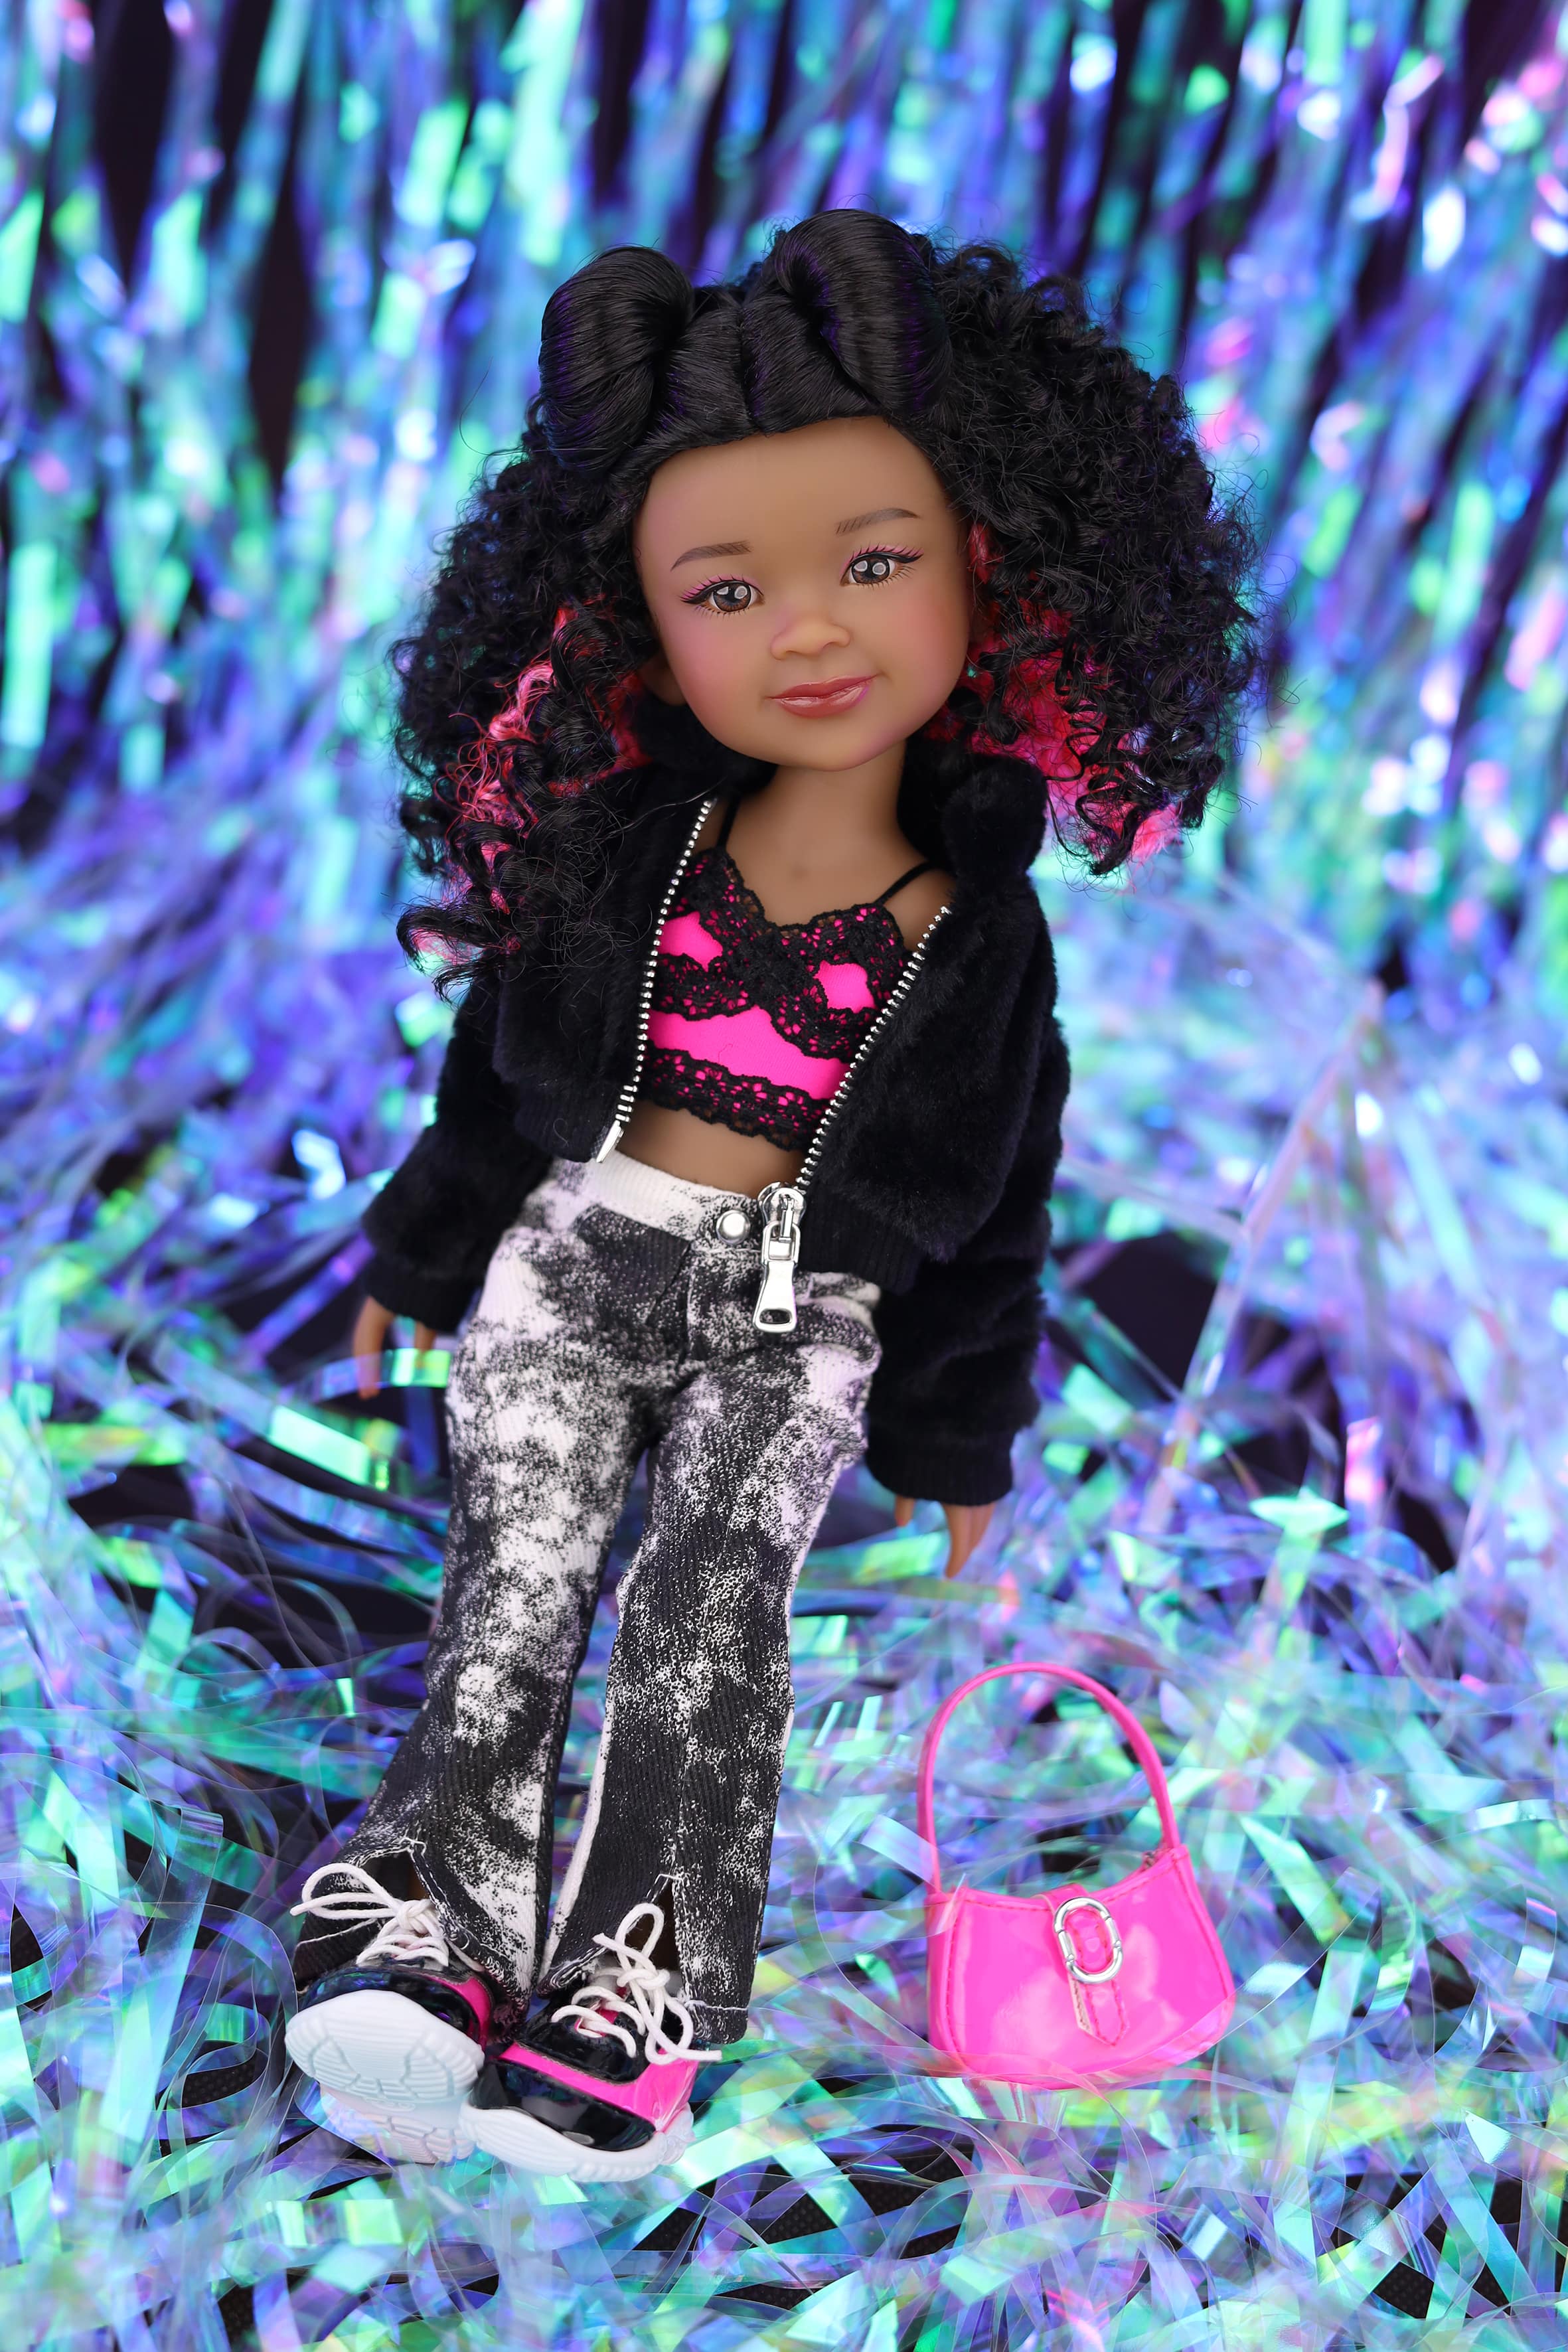 Back to the future: Meet Our Ruby Red Siblies Y2K-inspired Dolls! -  RubyRedToys